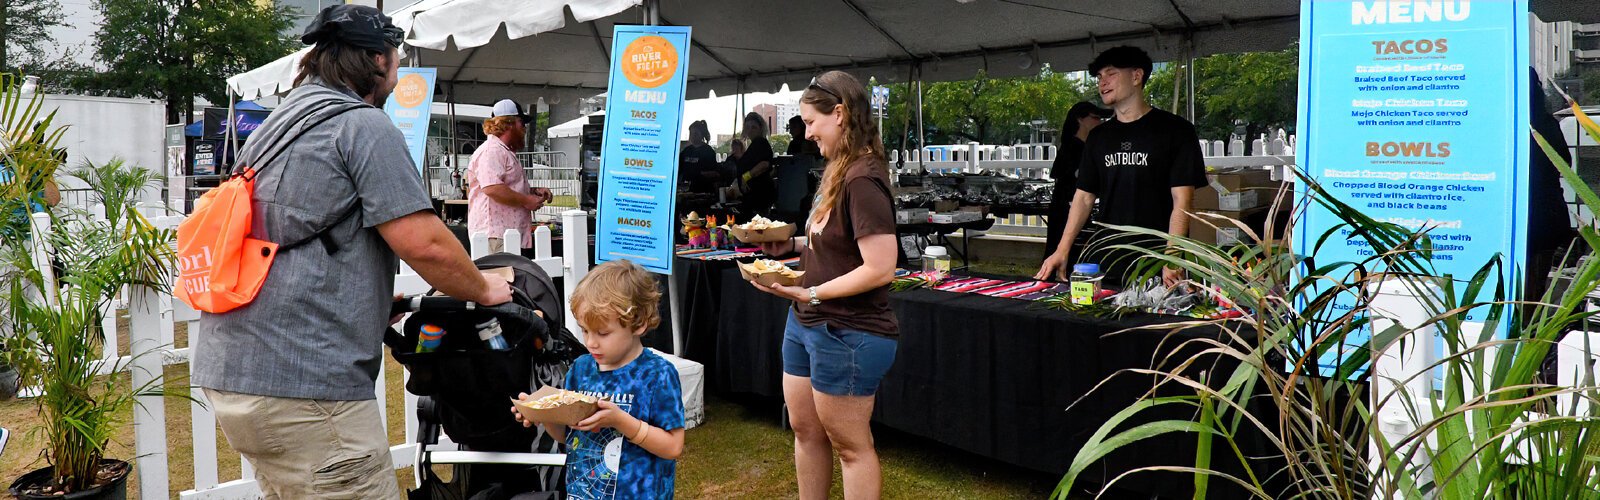  A first this year at Tampa Riverfest is the RiverFiesta food tent in Curtis Hixon Waterfront Park, where event-goers can try a variety of tacos, bowls and nachos with the purchase of a wristband for food sampling. 